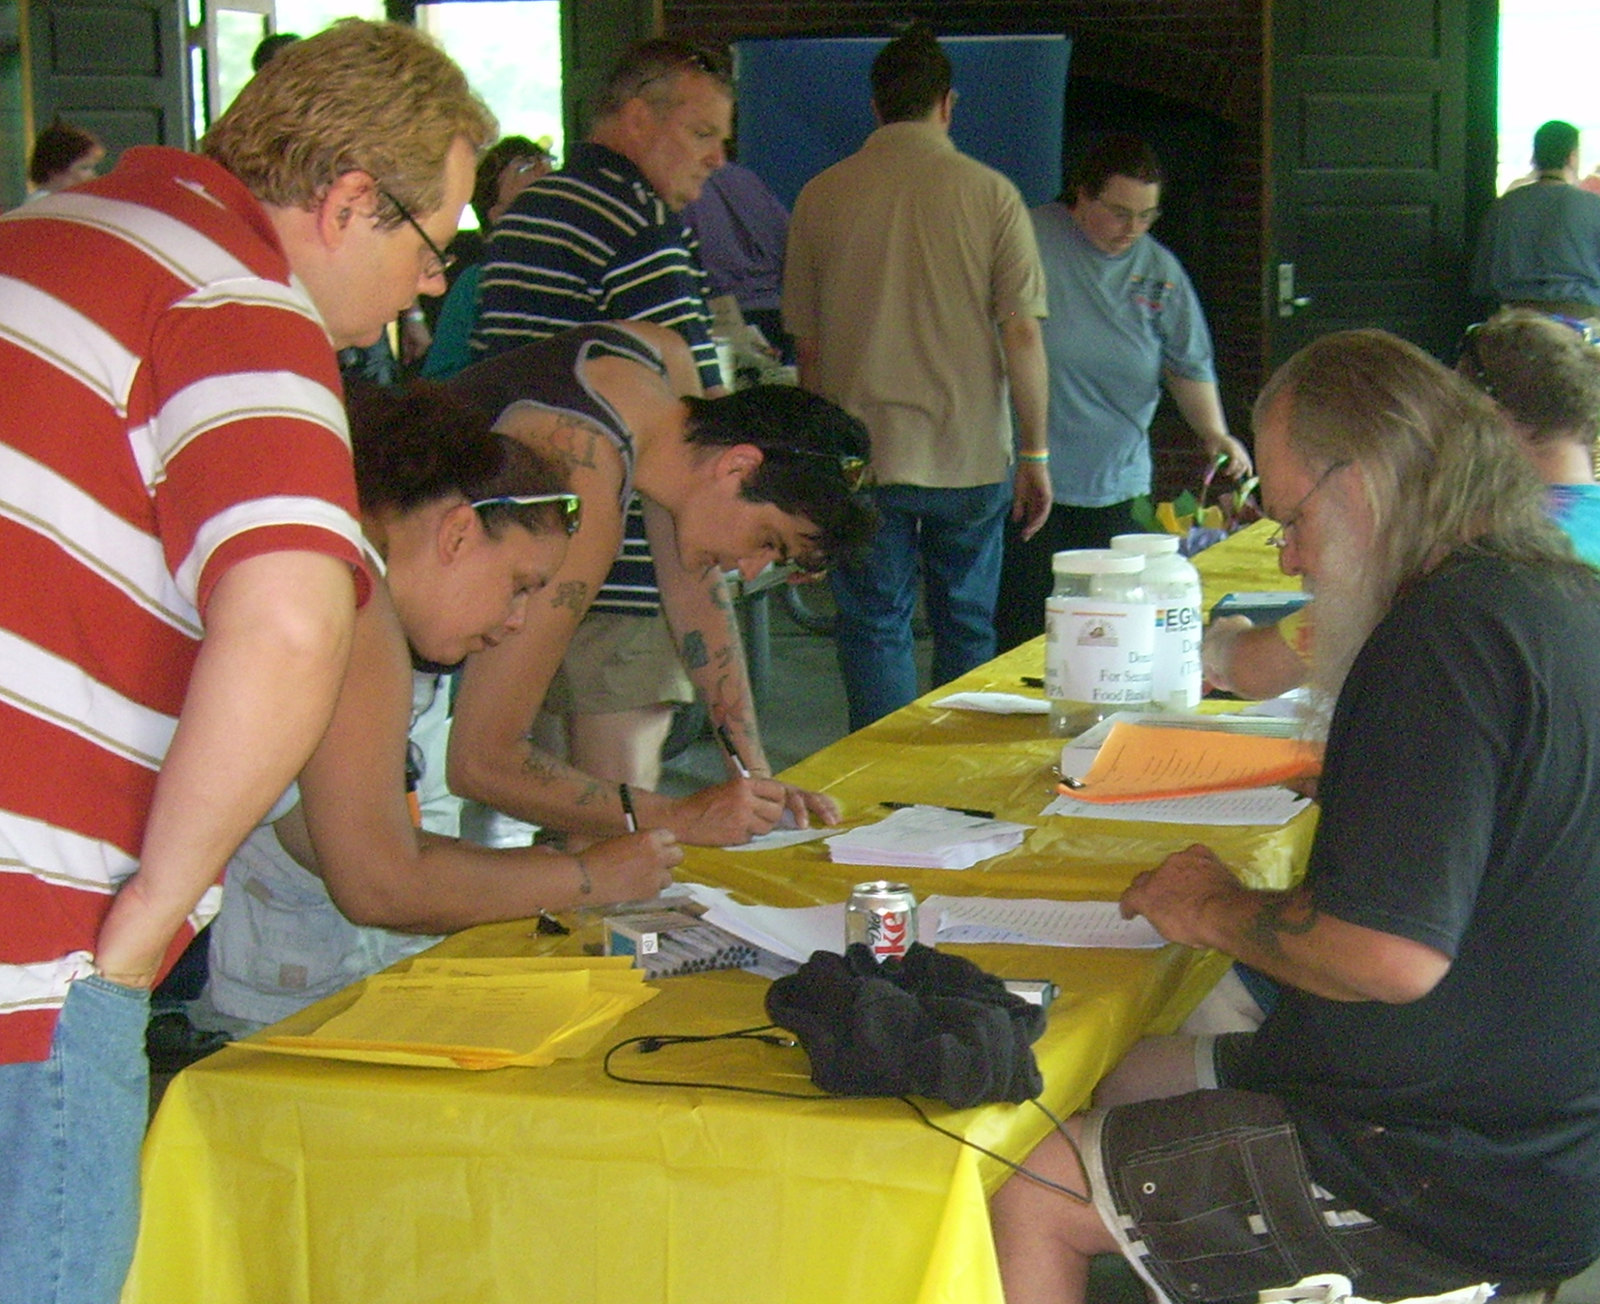 Dok checking people in at the registration table. Photo by James von Loewe